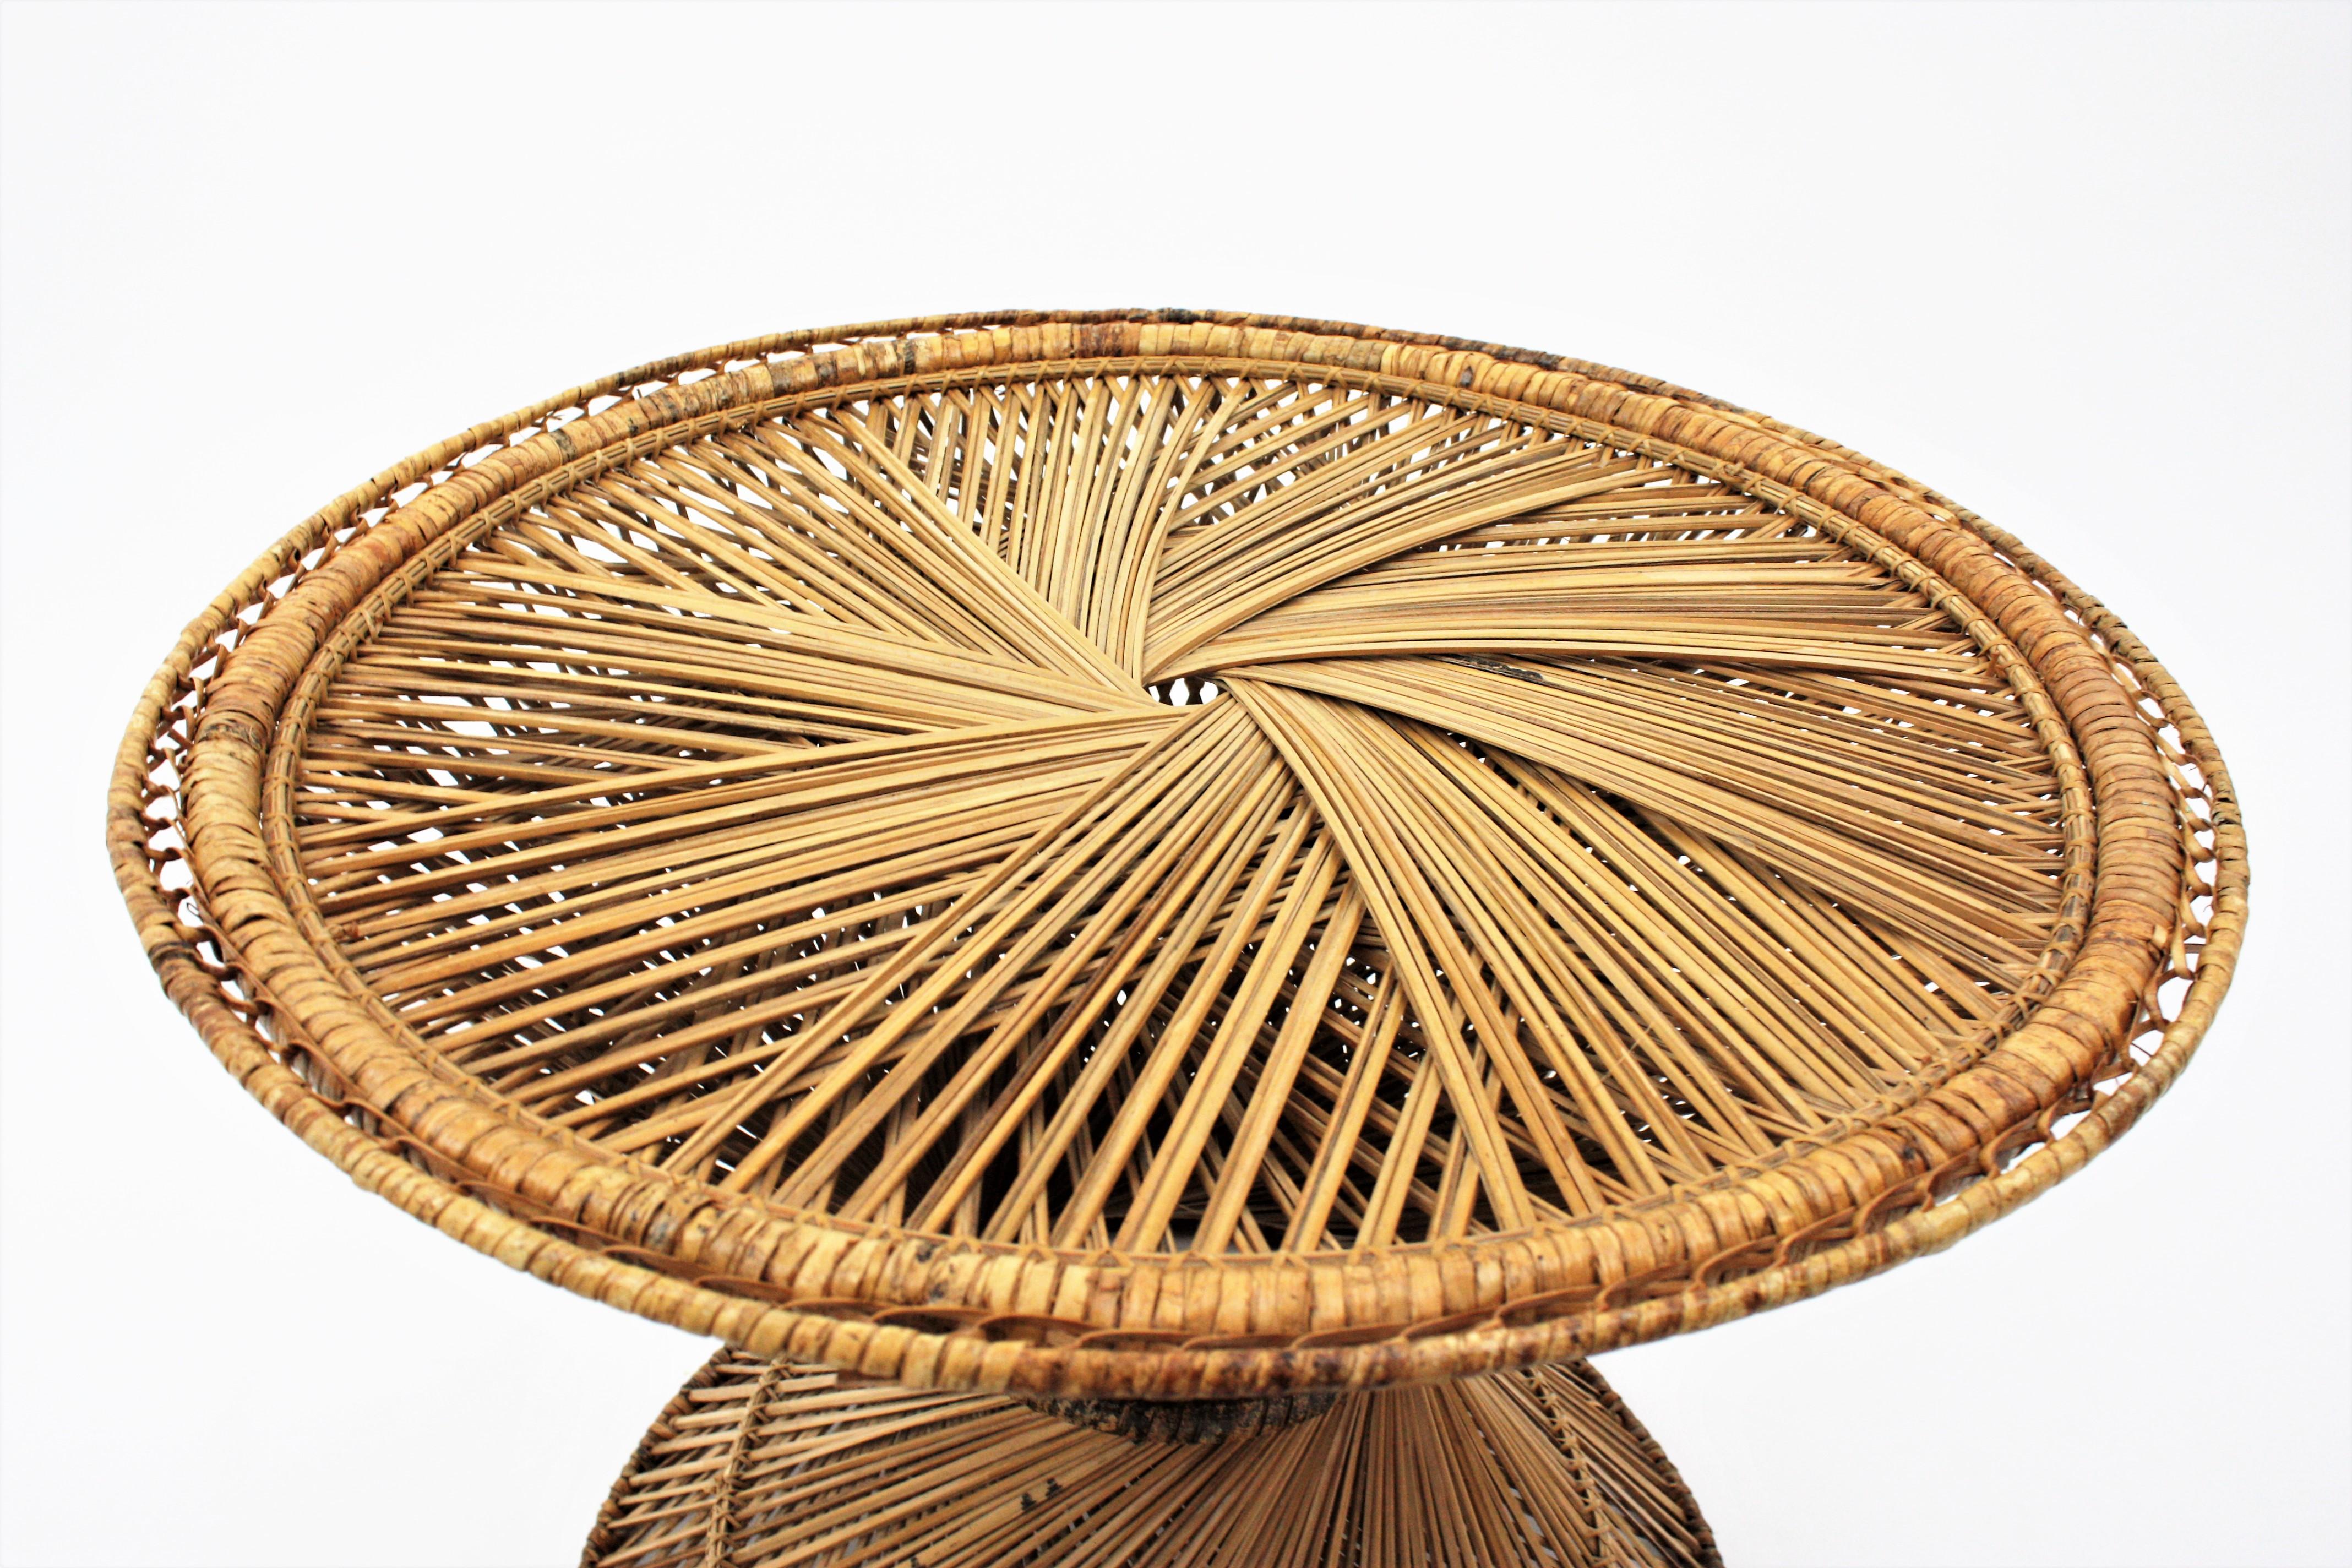 Woven Wicker and Rattan Emmanuelle Peacock Coffee Table, Spain, 1960s In Good Condition For Sale In Barcelona, ES